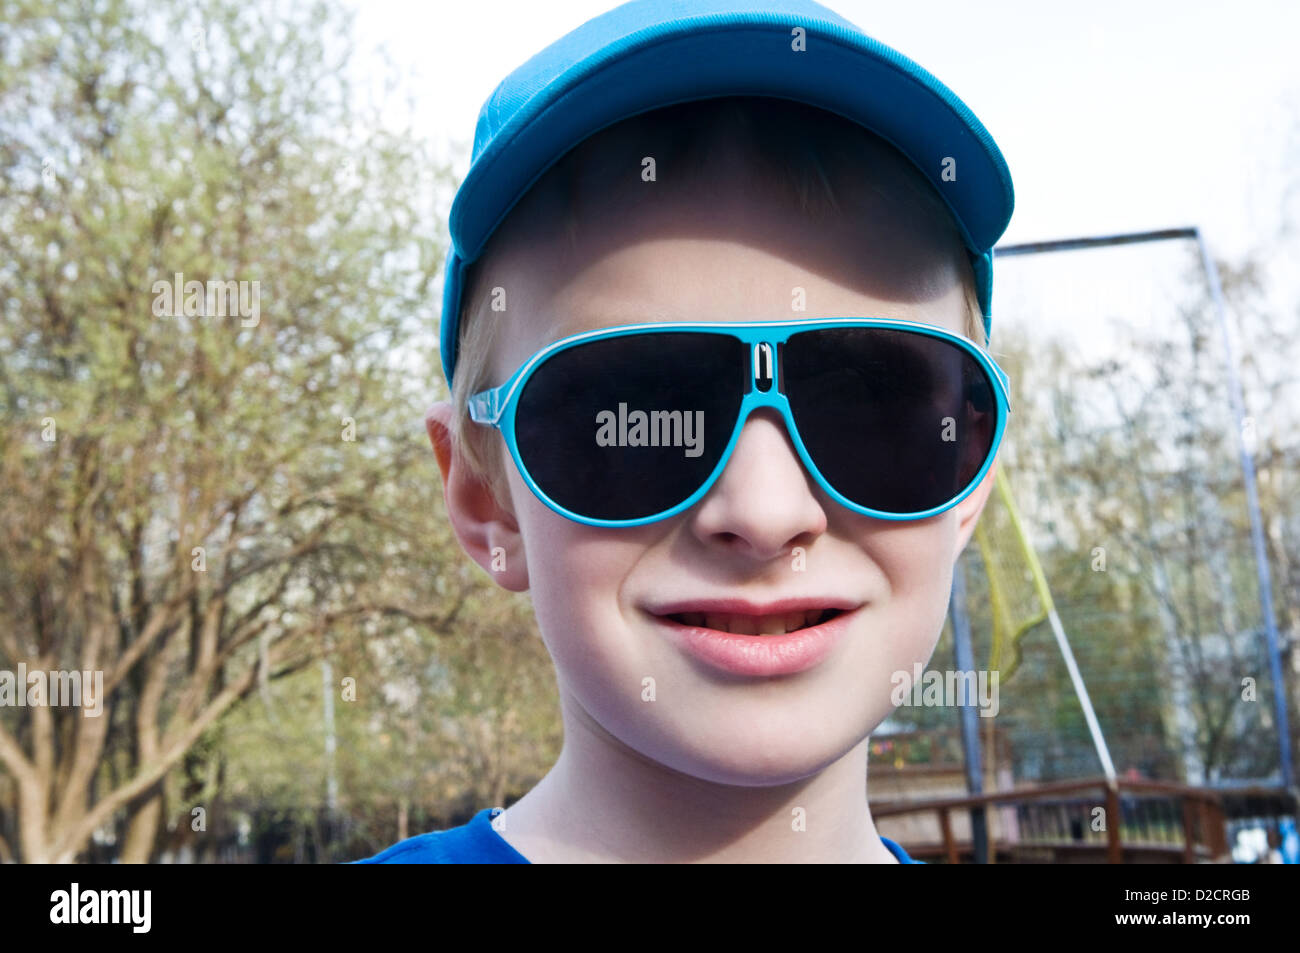 Cute smiling boy wearing Sunglasses and baseball cap Banque D'Images